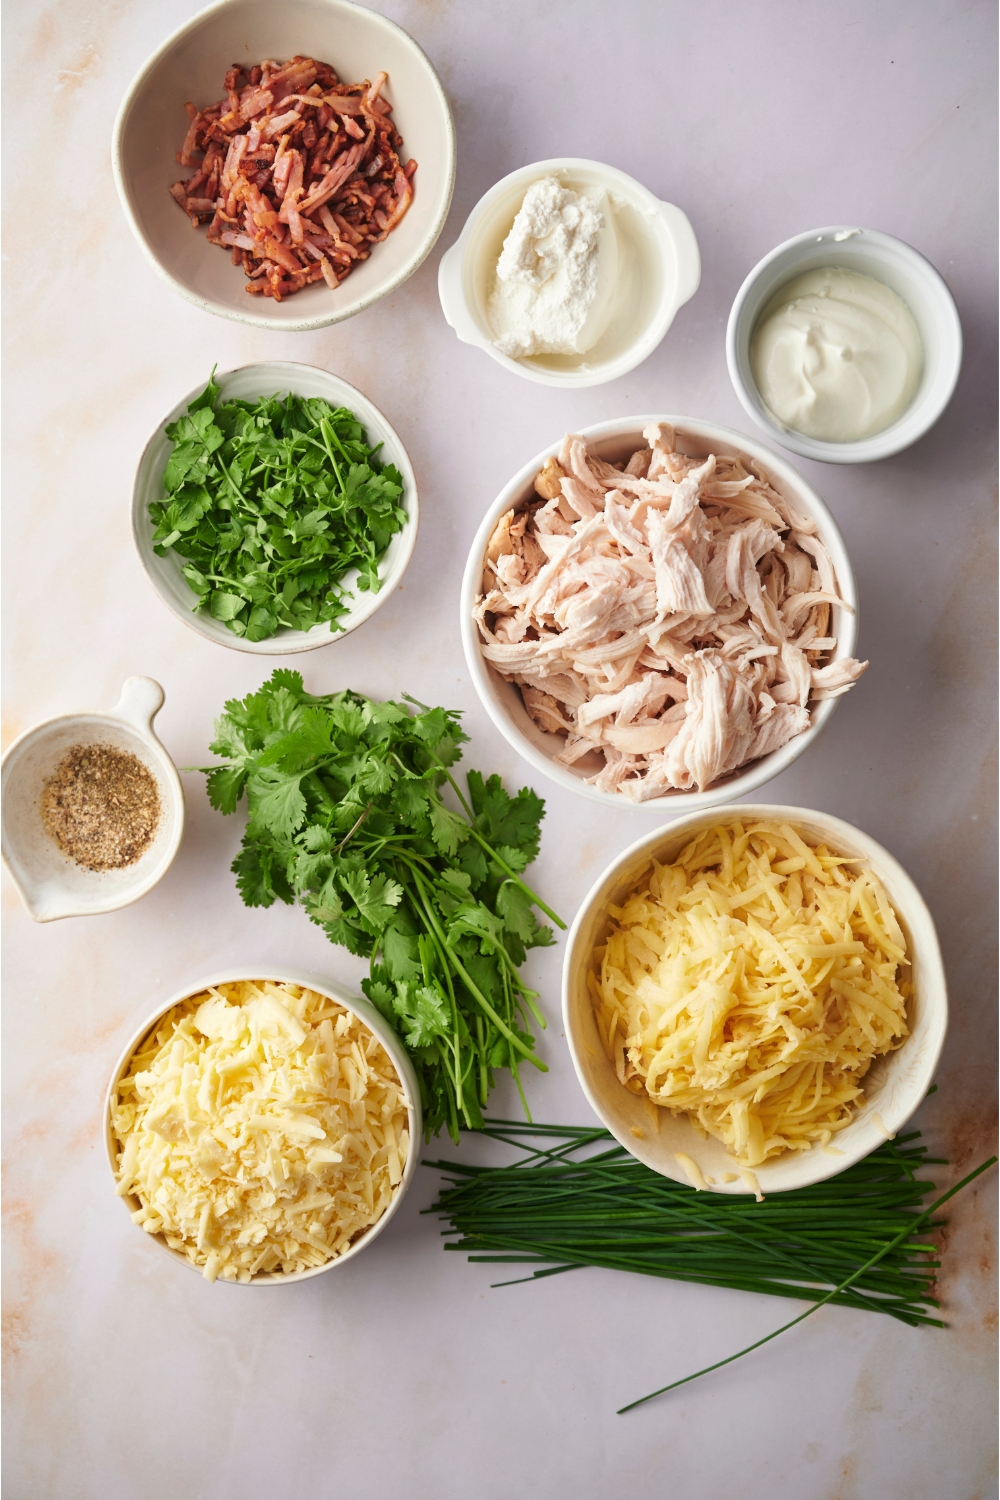 An assortment of ingredients including bowls of shredded chicken, uncooked hashbrowns, fresh herbs, shredded cheese, bacon, cream cheese, and sour cream.